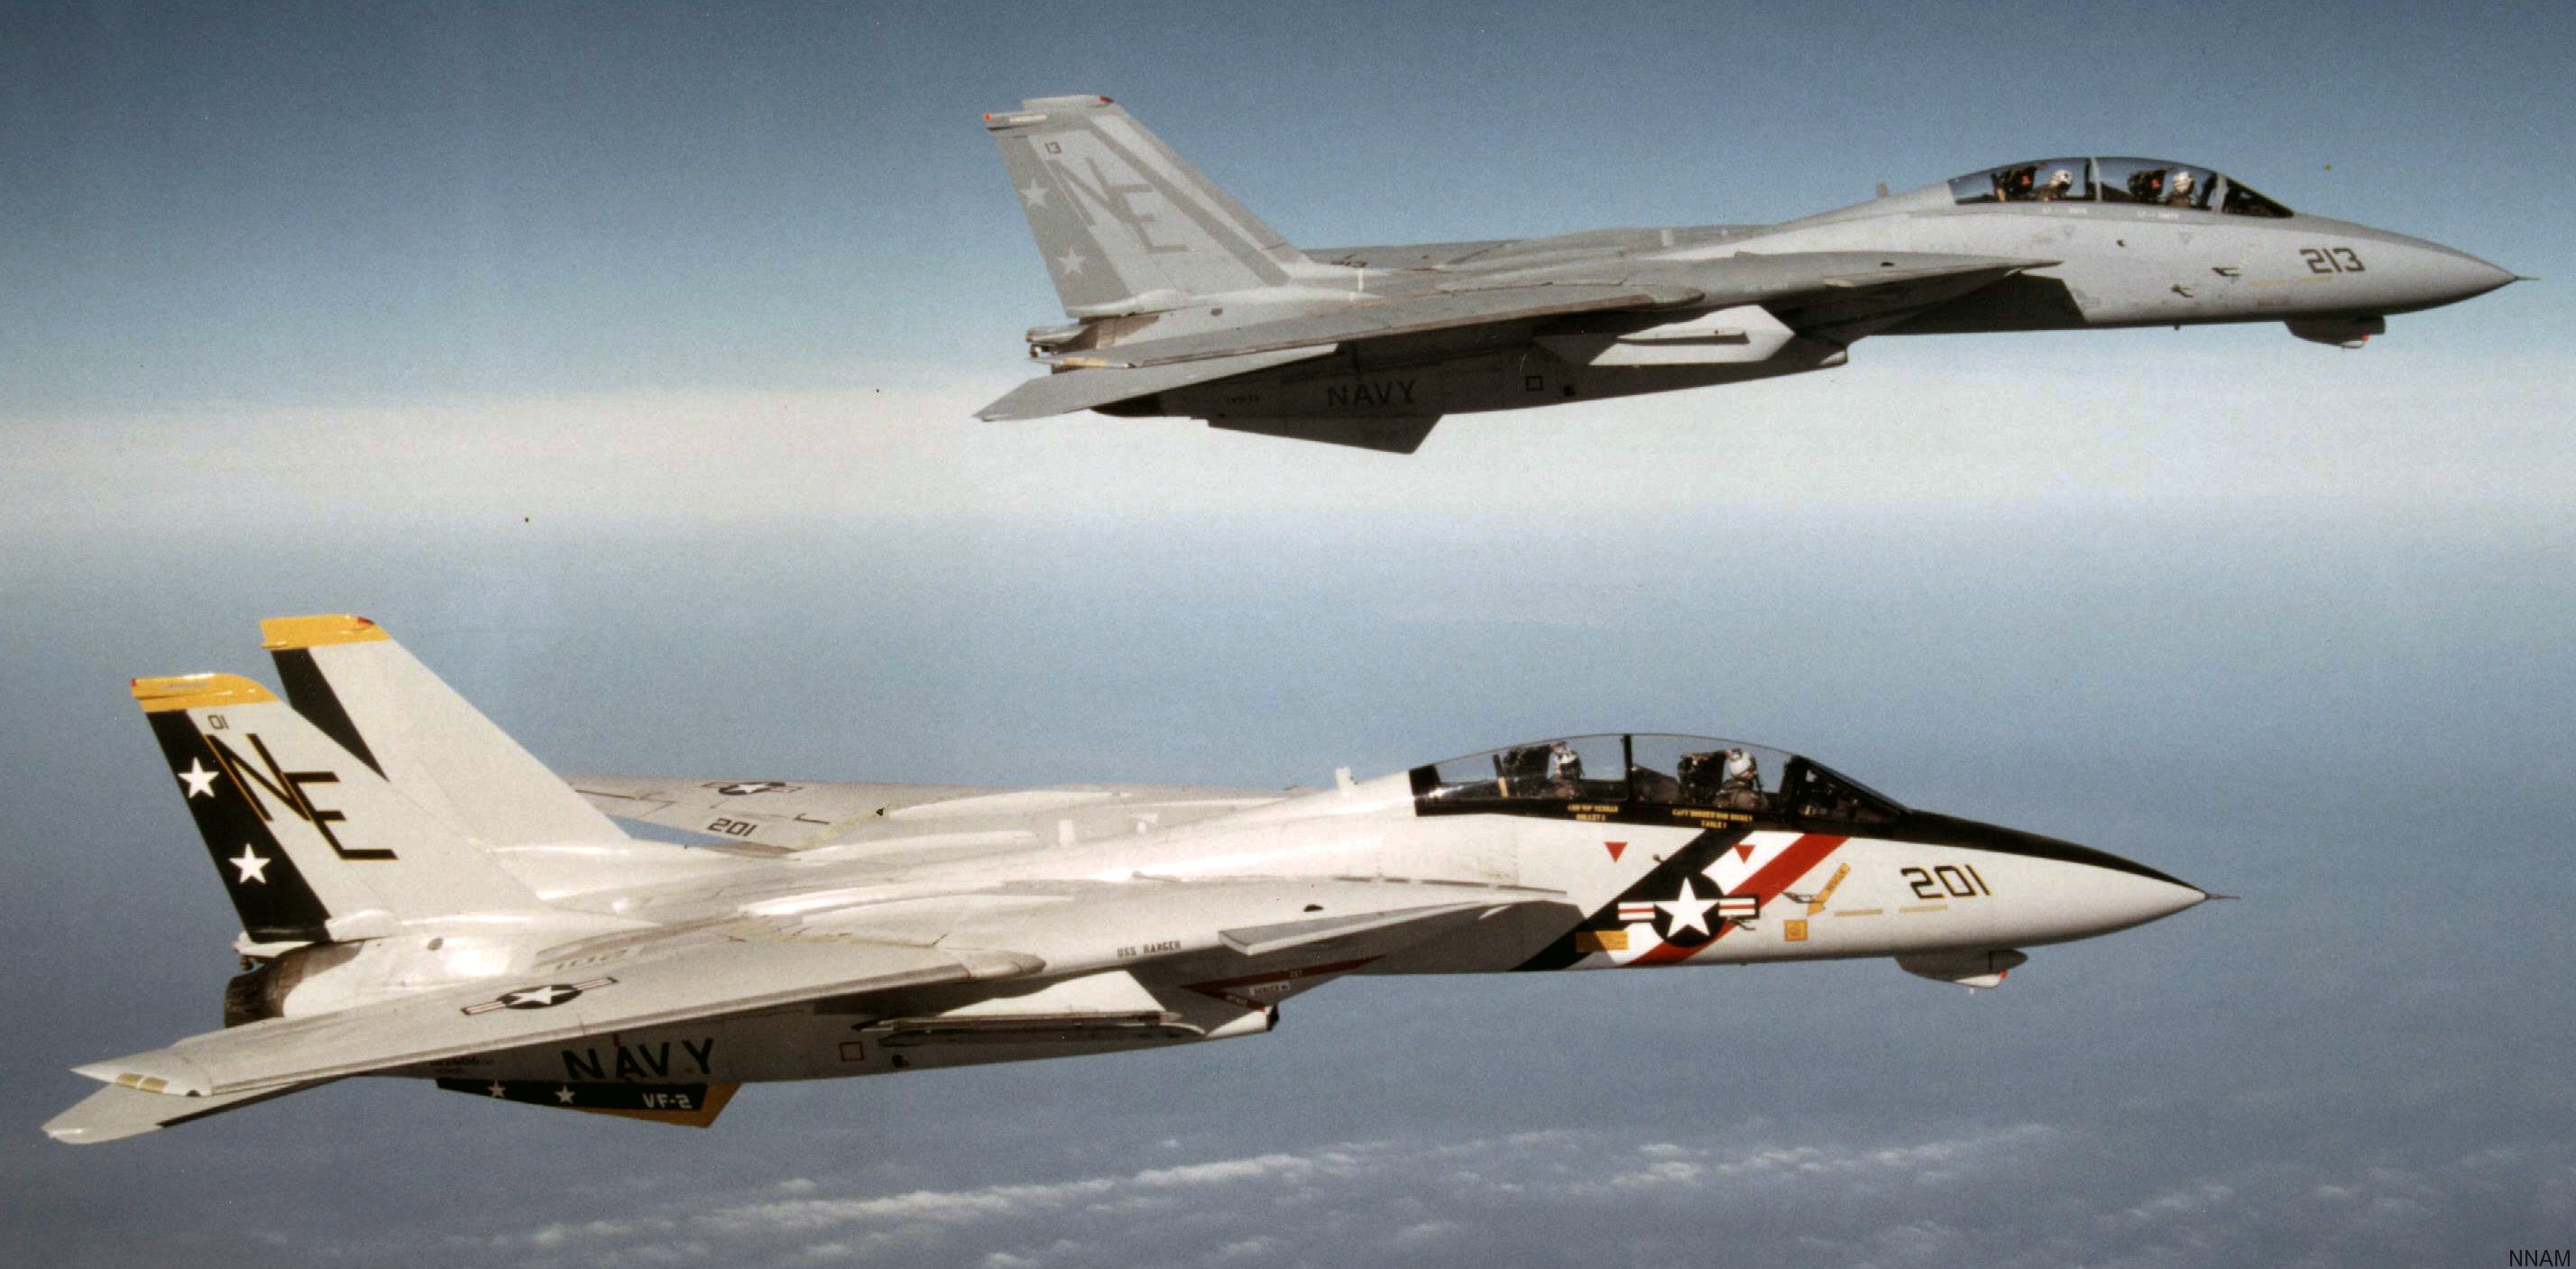 vf-2 bounty hunters fighter squadron fitron f-14a tomcat carrier air wing cvw-2 uss ranger cv-61 54